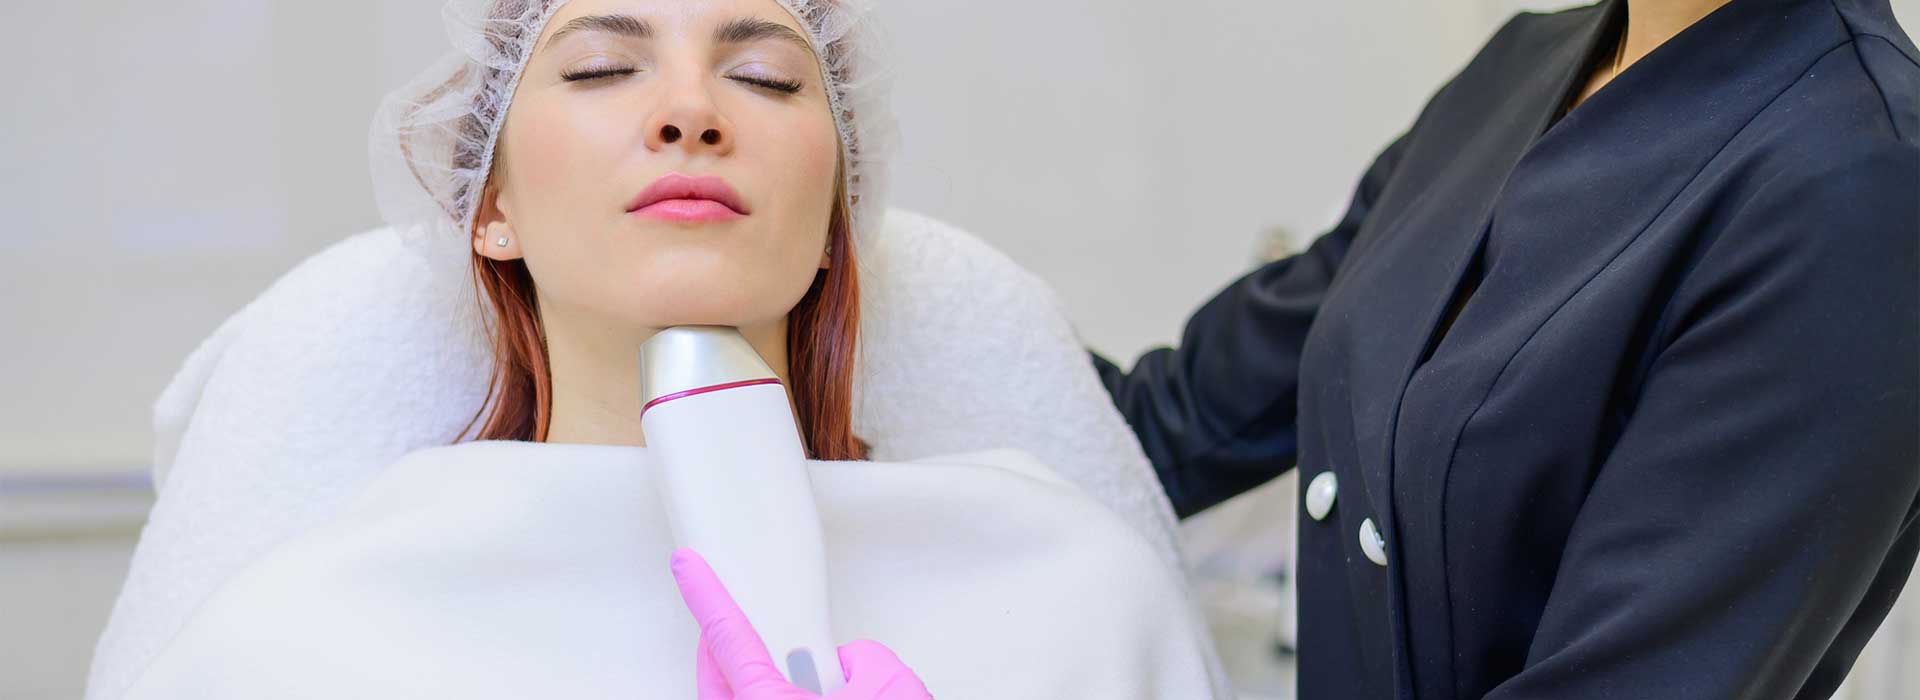 Infini Radiofrequency Microneedling treatments at Perfect Skin MD